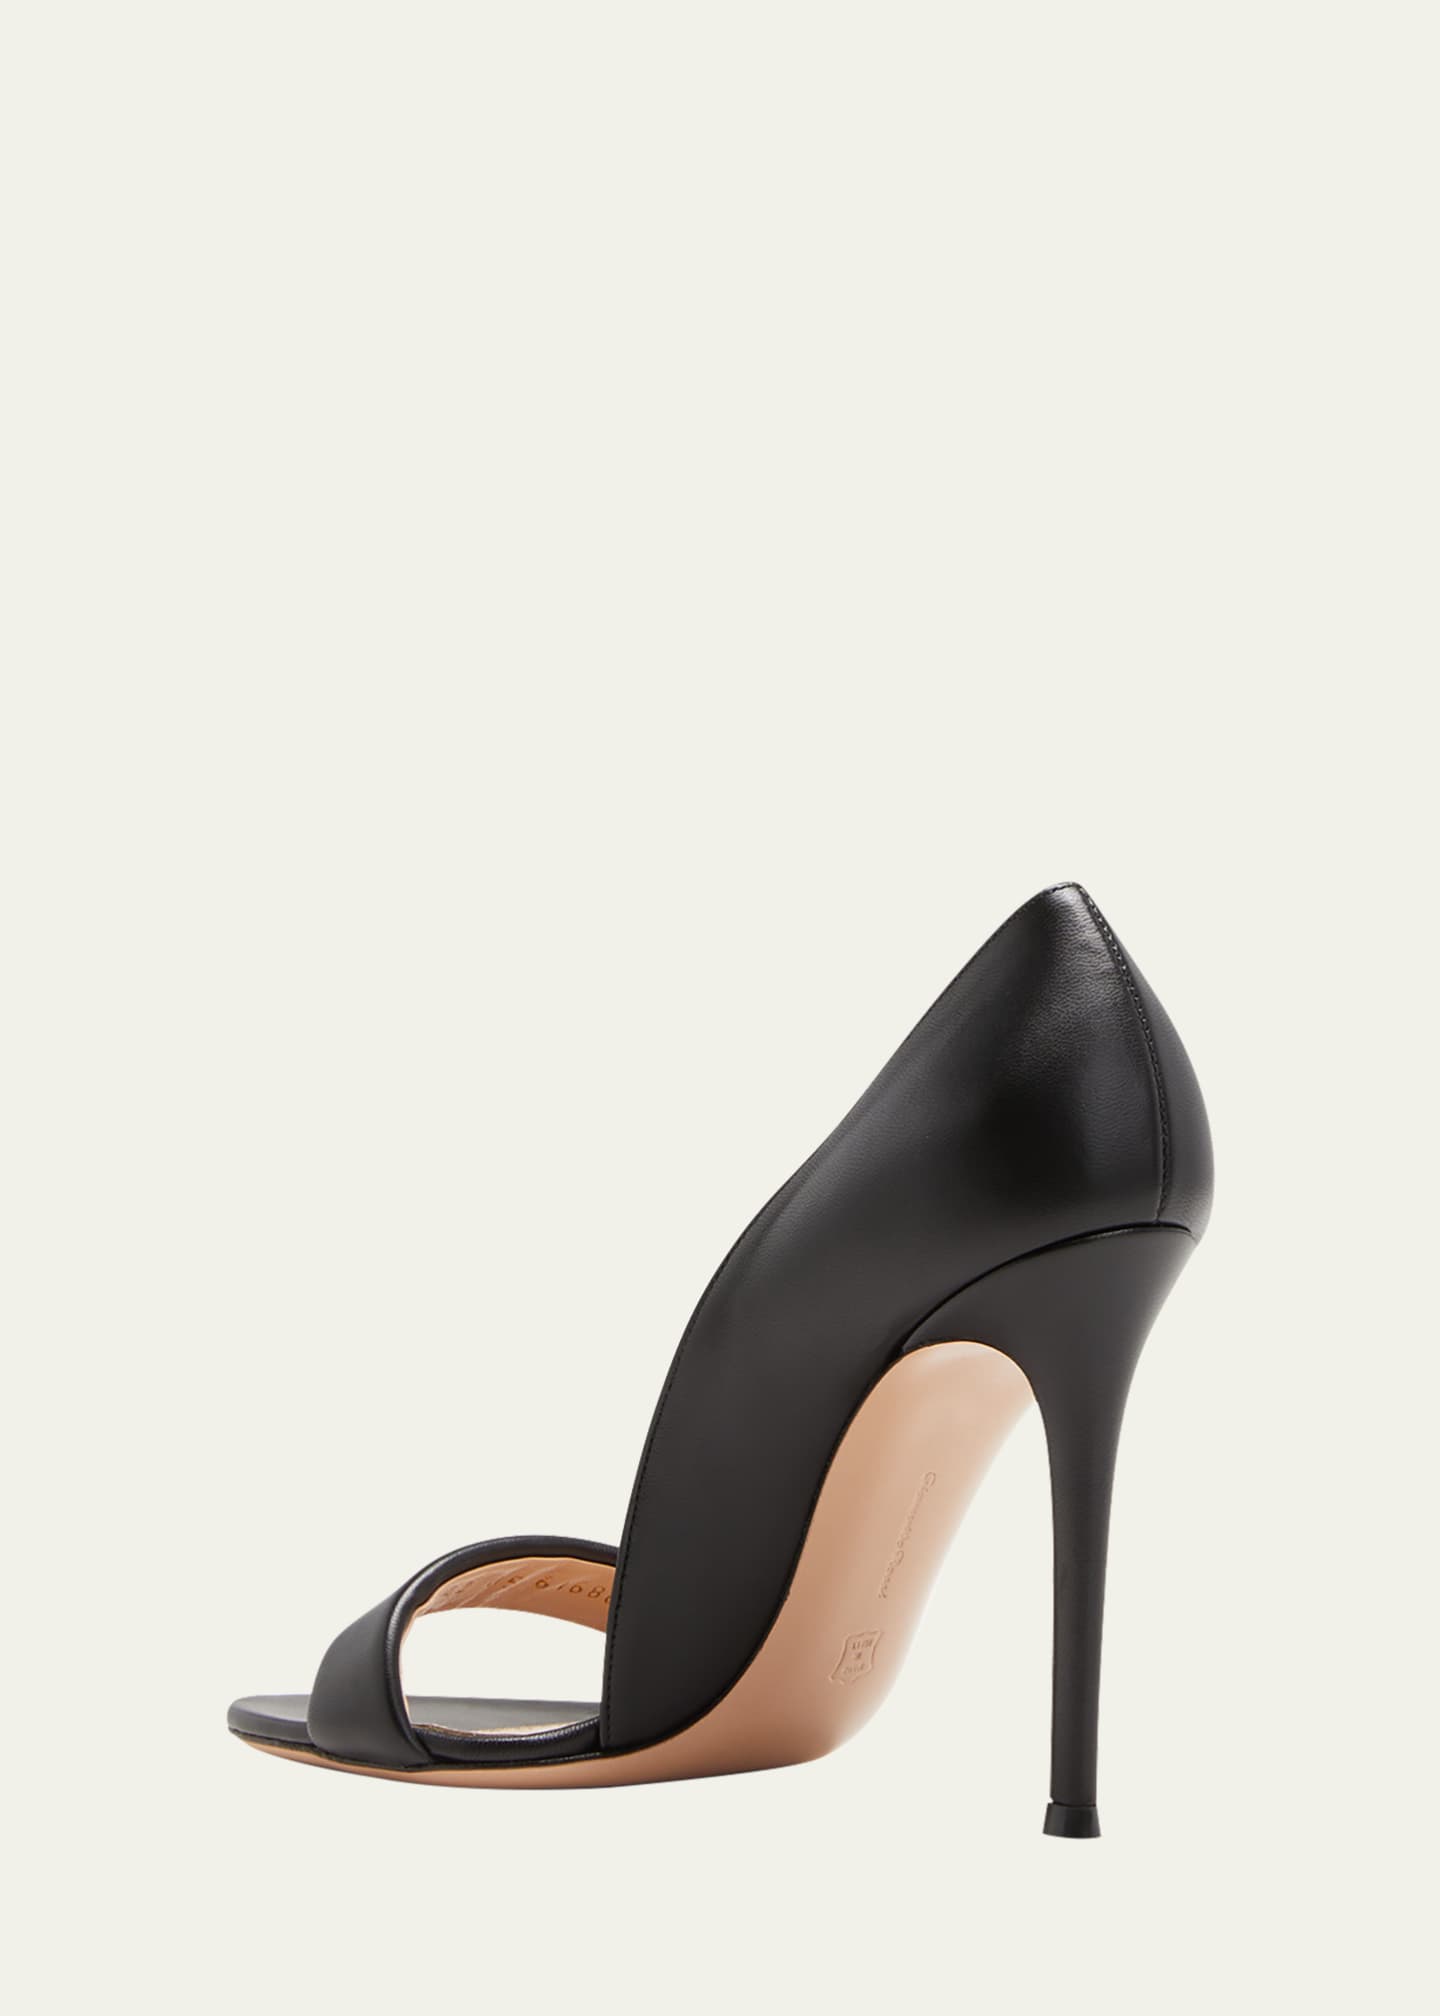 Gianvito Rossi 105mm Leather d'Orsay Sandals - Bergdorf Goodman